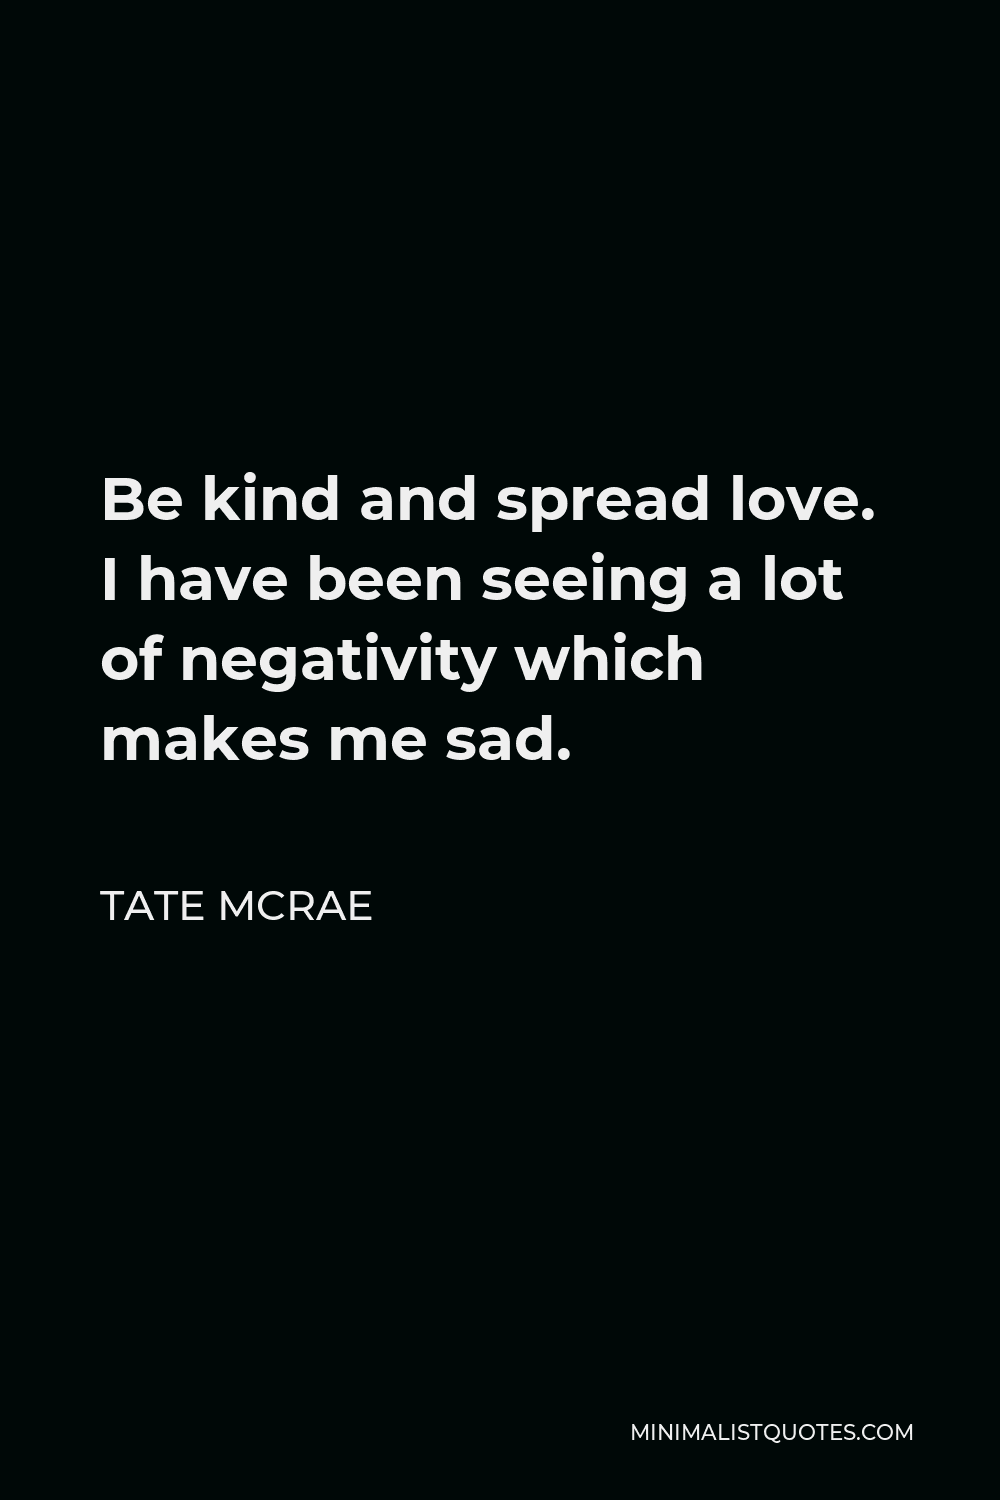 Tate McRae Quote - Be kind and spread love. I have been seeing a lot of negativity which makes me sad.